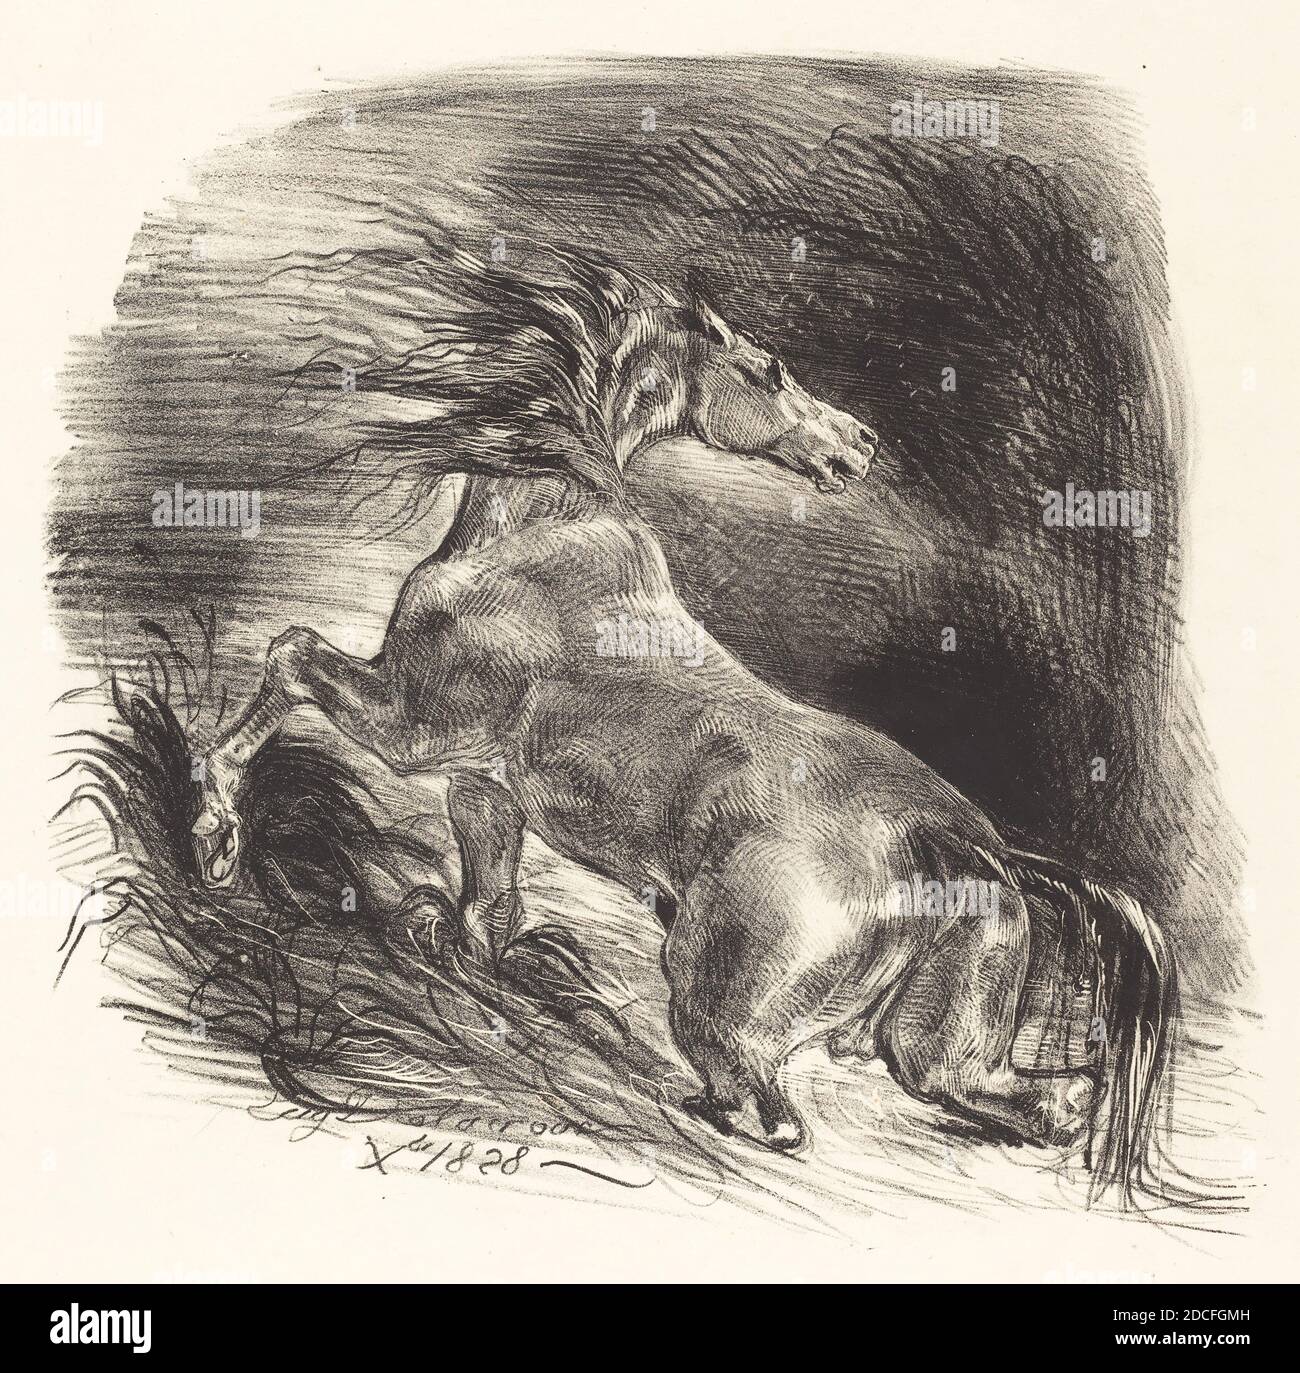 Eugène Delacroix, (artist), French, 1798 - 1863, Wild Horse Coming out of the Water (Cheval sauvage), 1828, lithograph, sheet: 47.3 x 35.2 cm (18 5/8 x 13 7/8 in Stock Photo